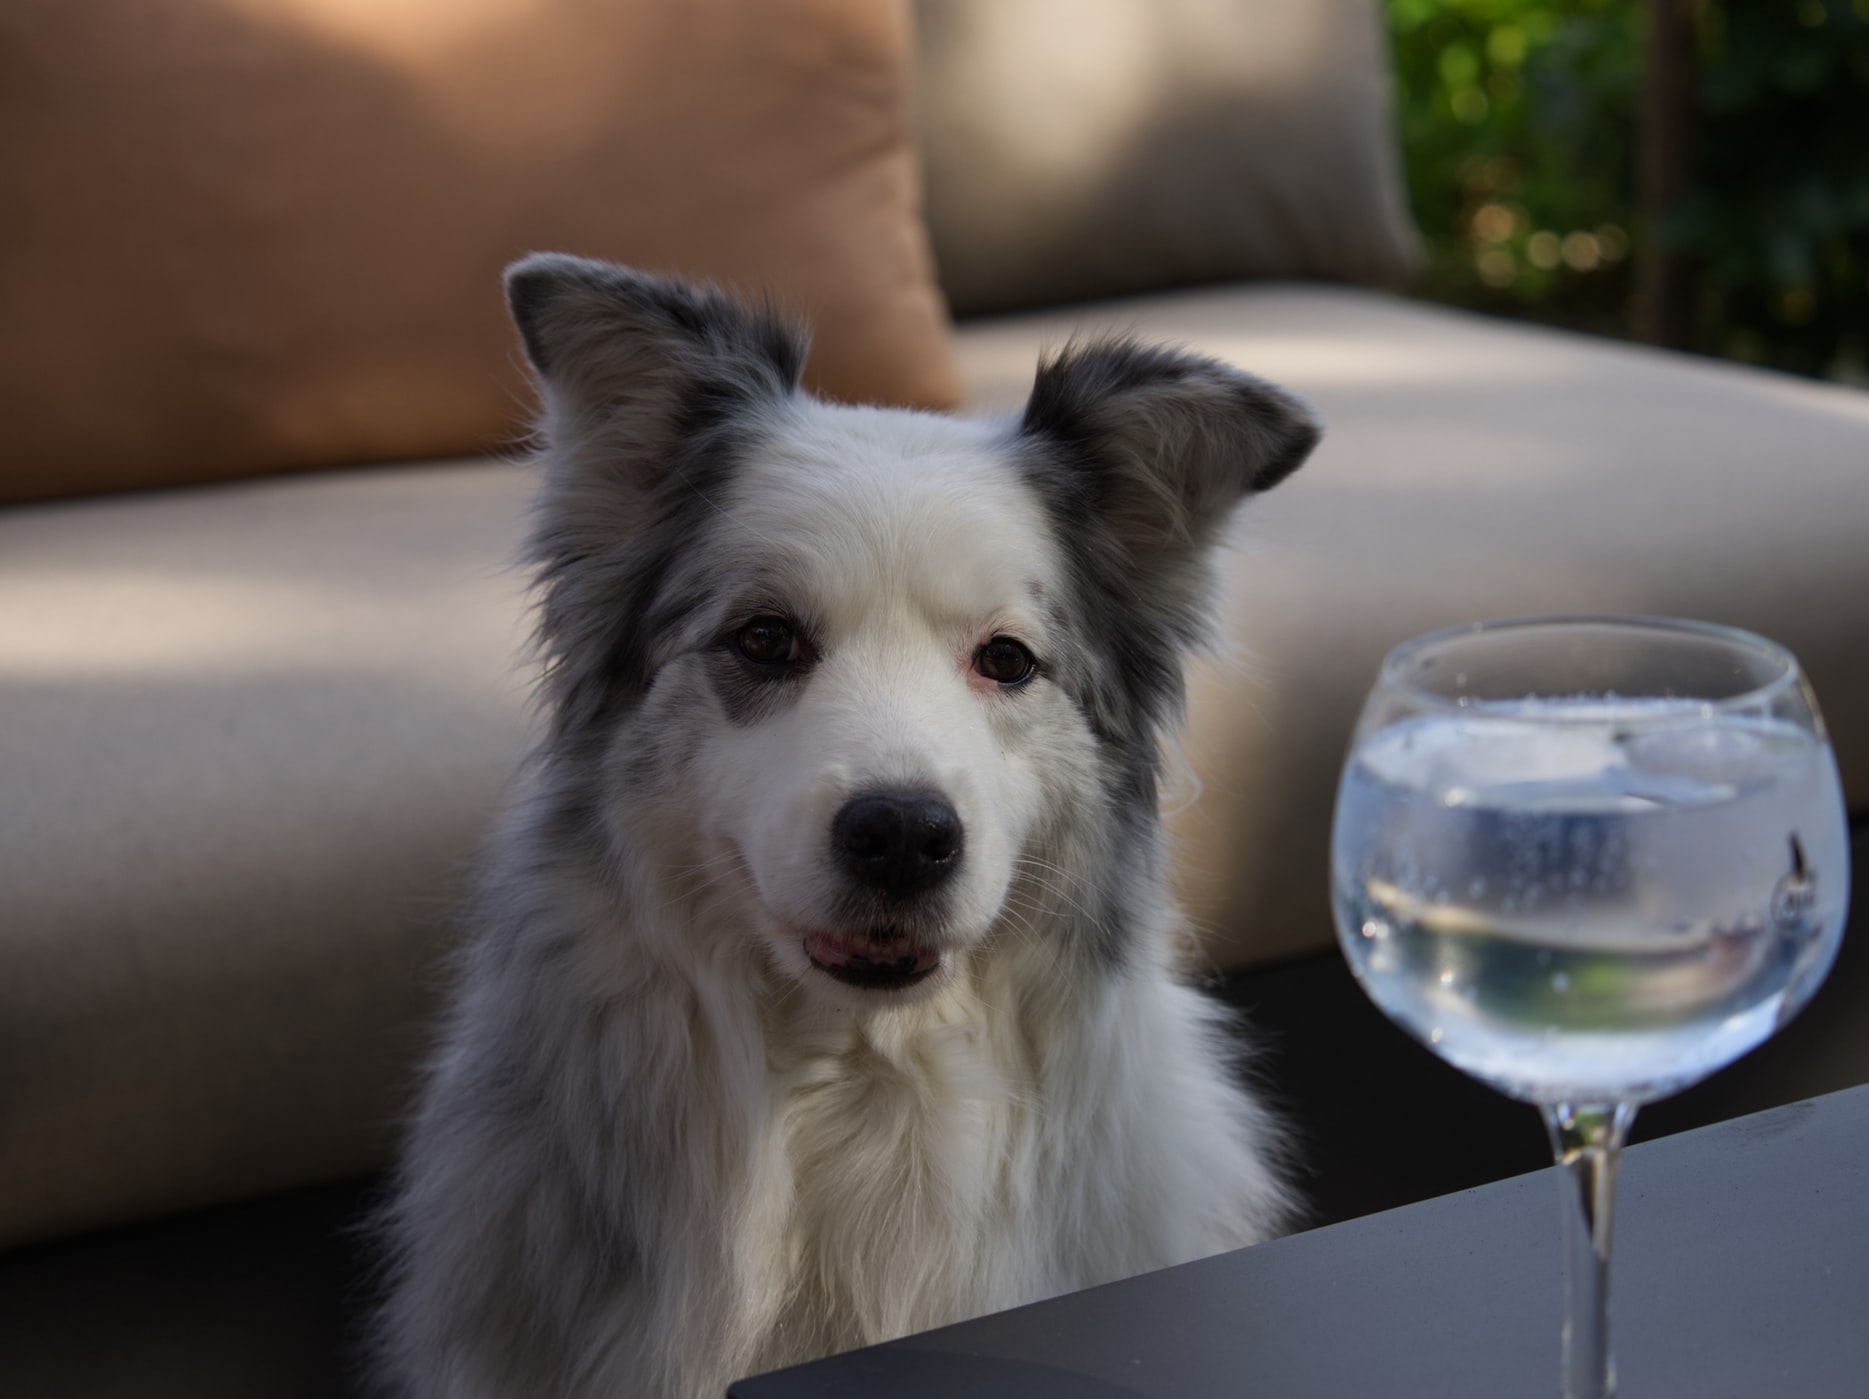 A Border Collie sitting on the floor while staring at the table on the table in front of him